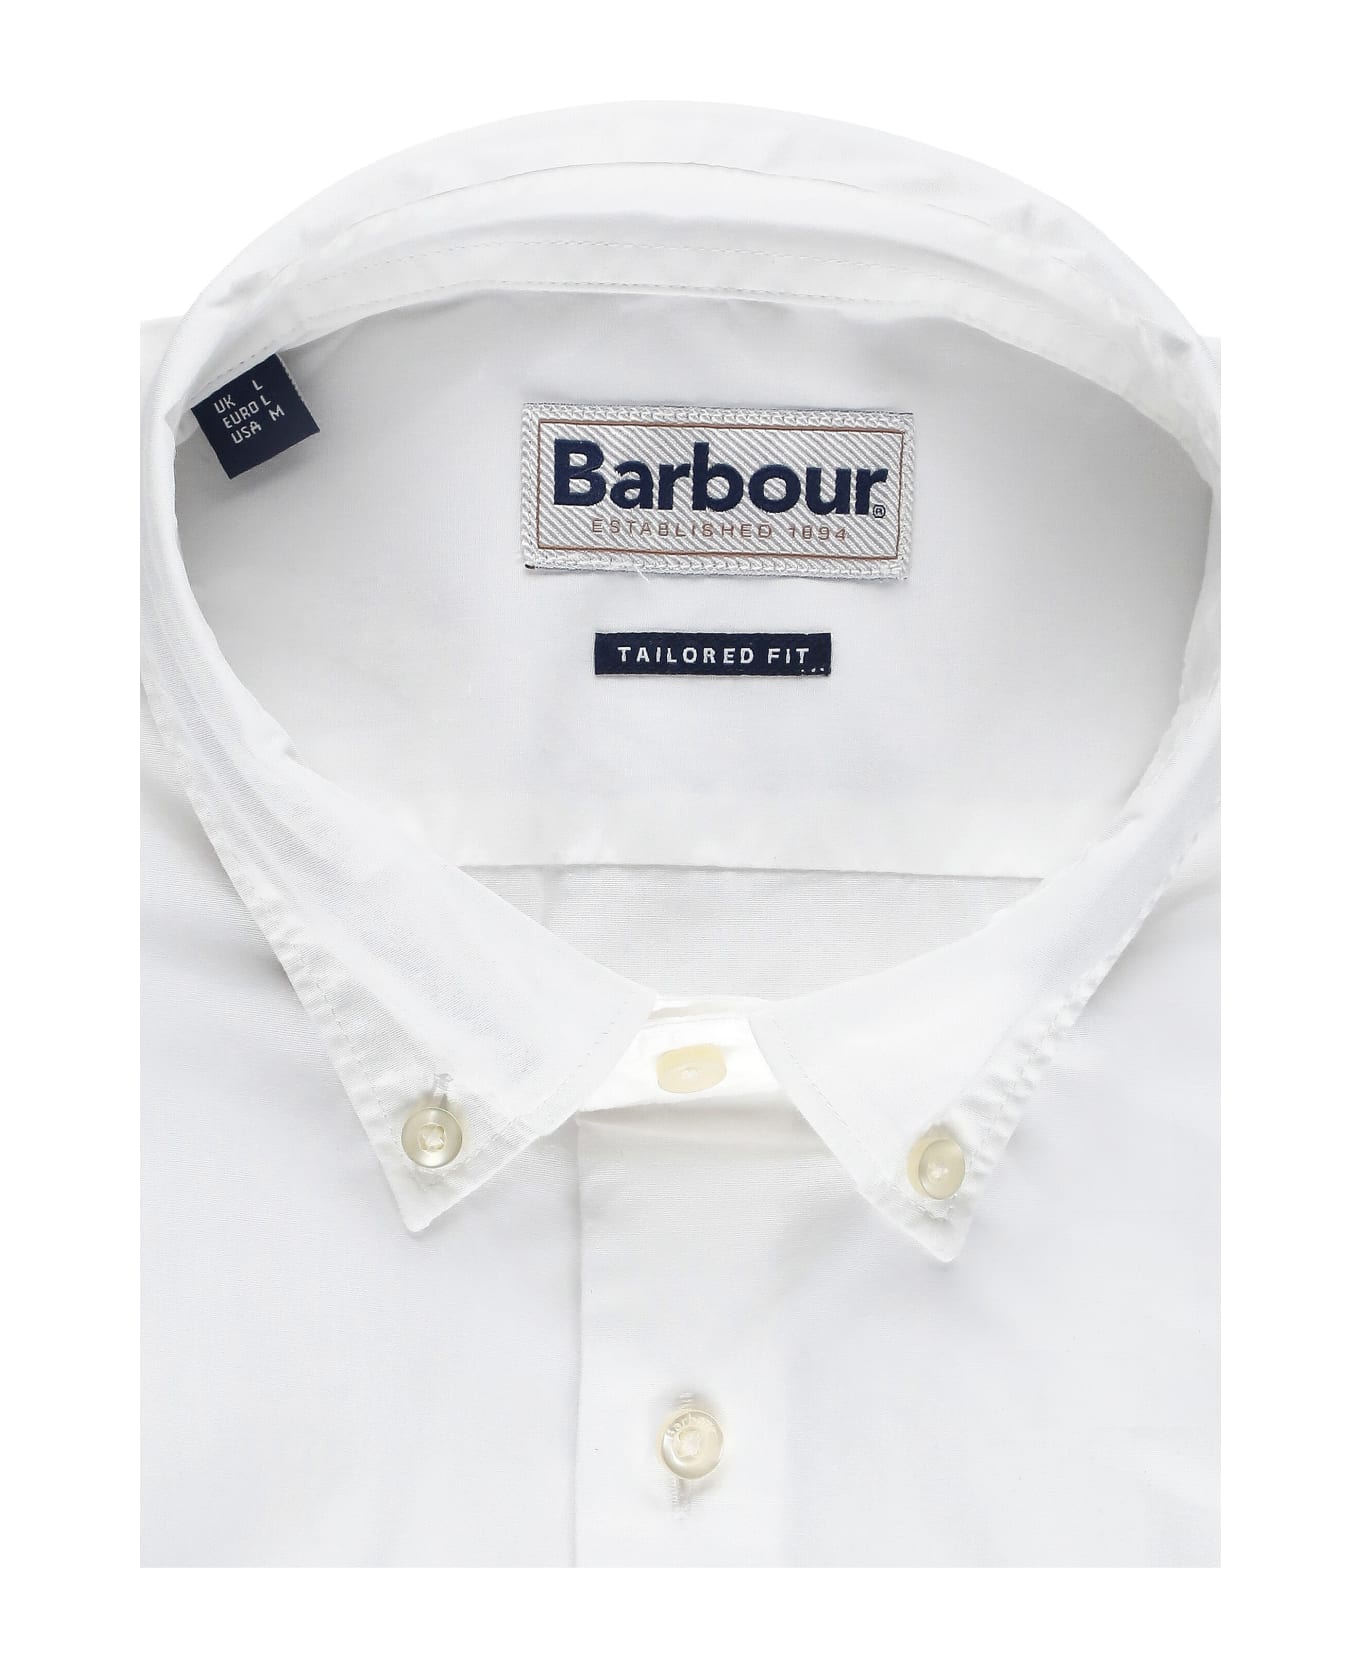 Barbour Logoed Shirt - White